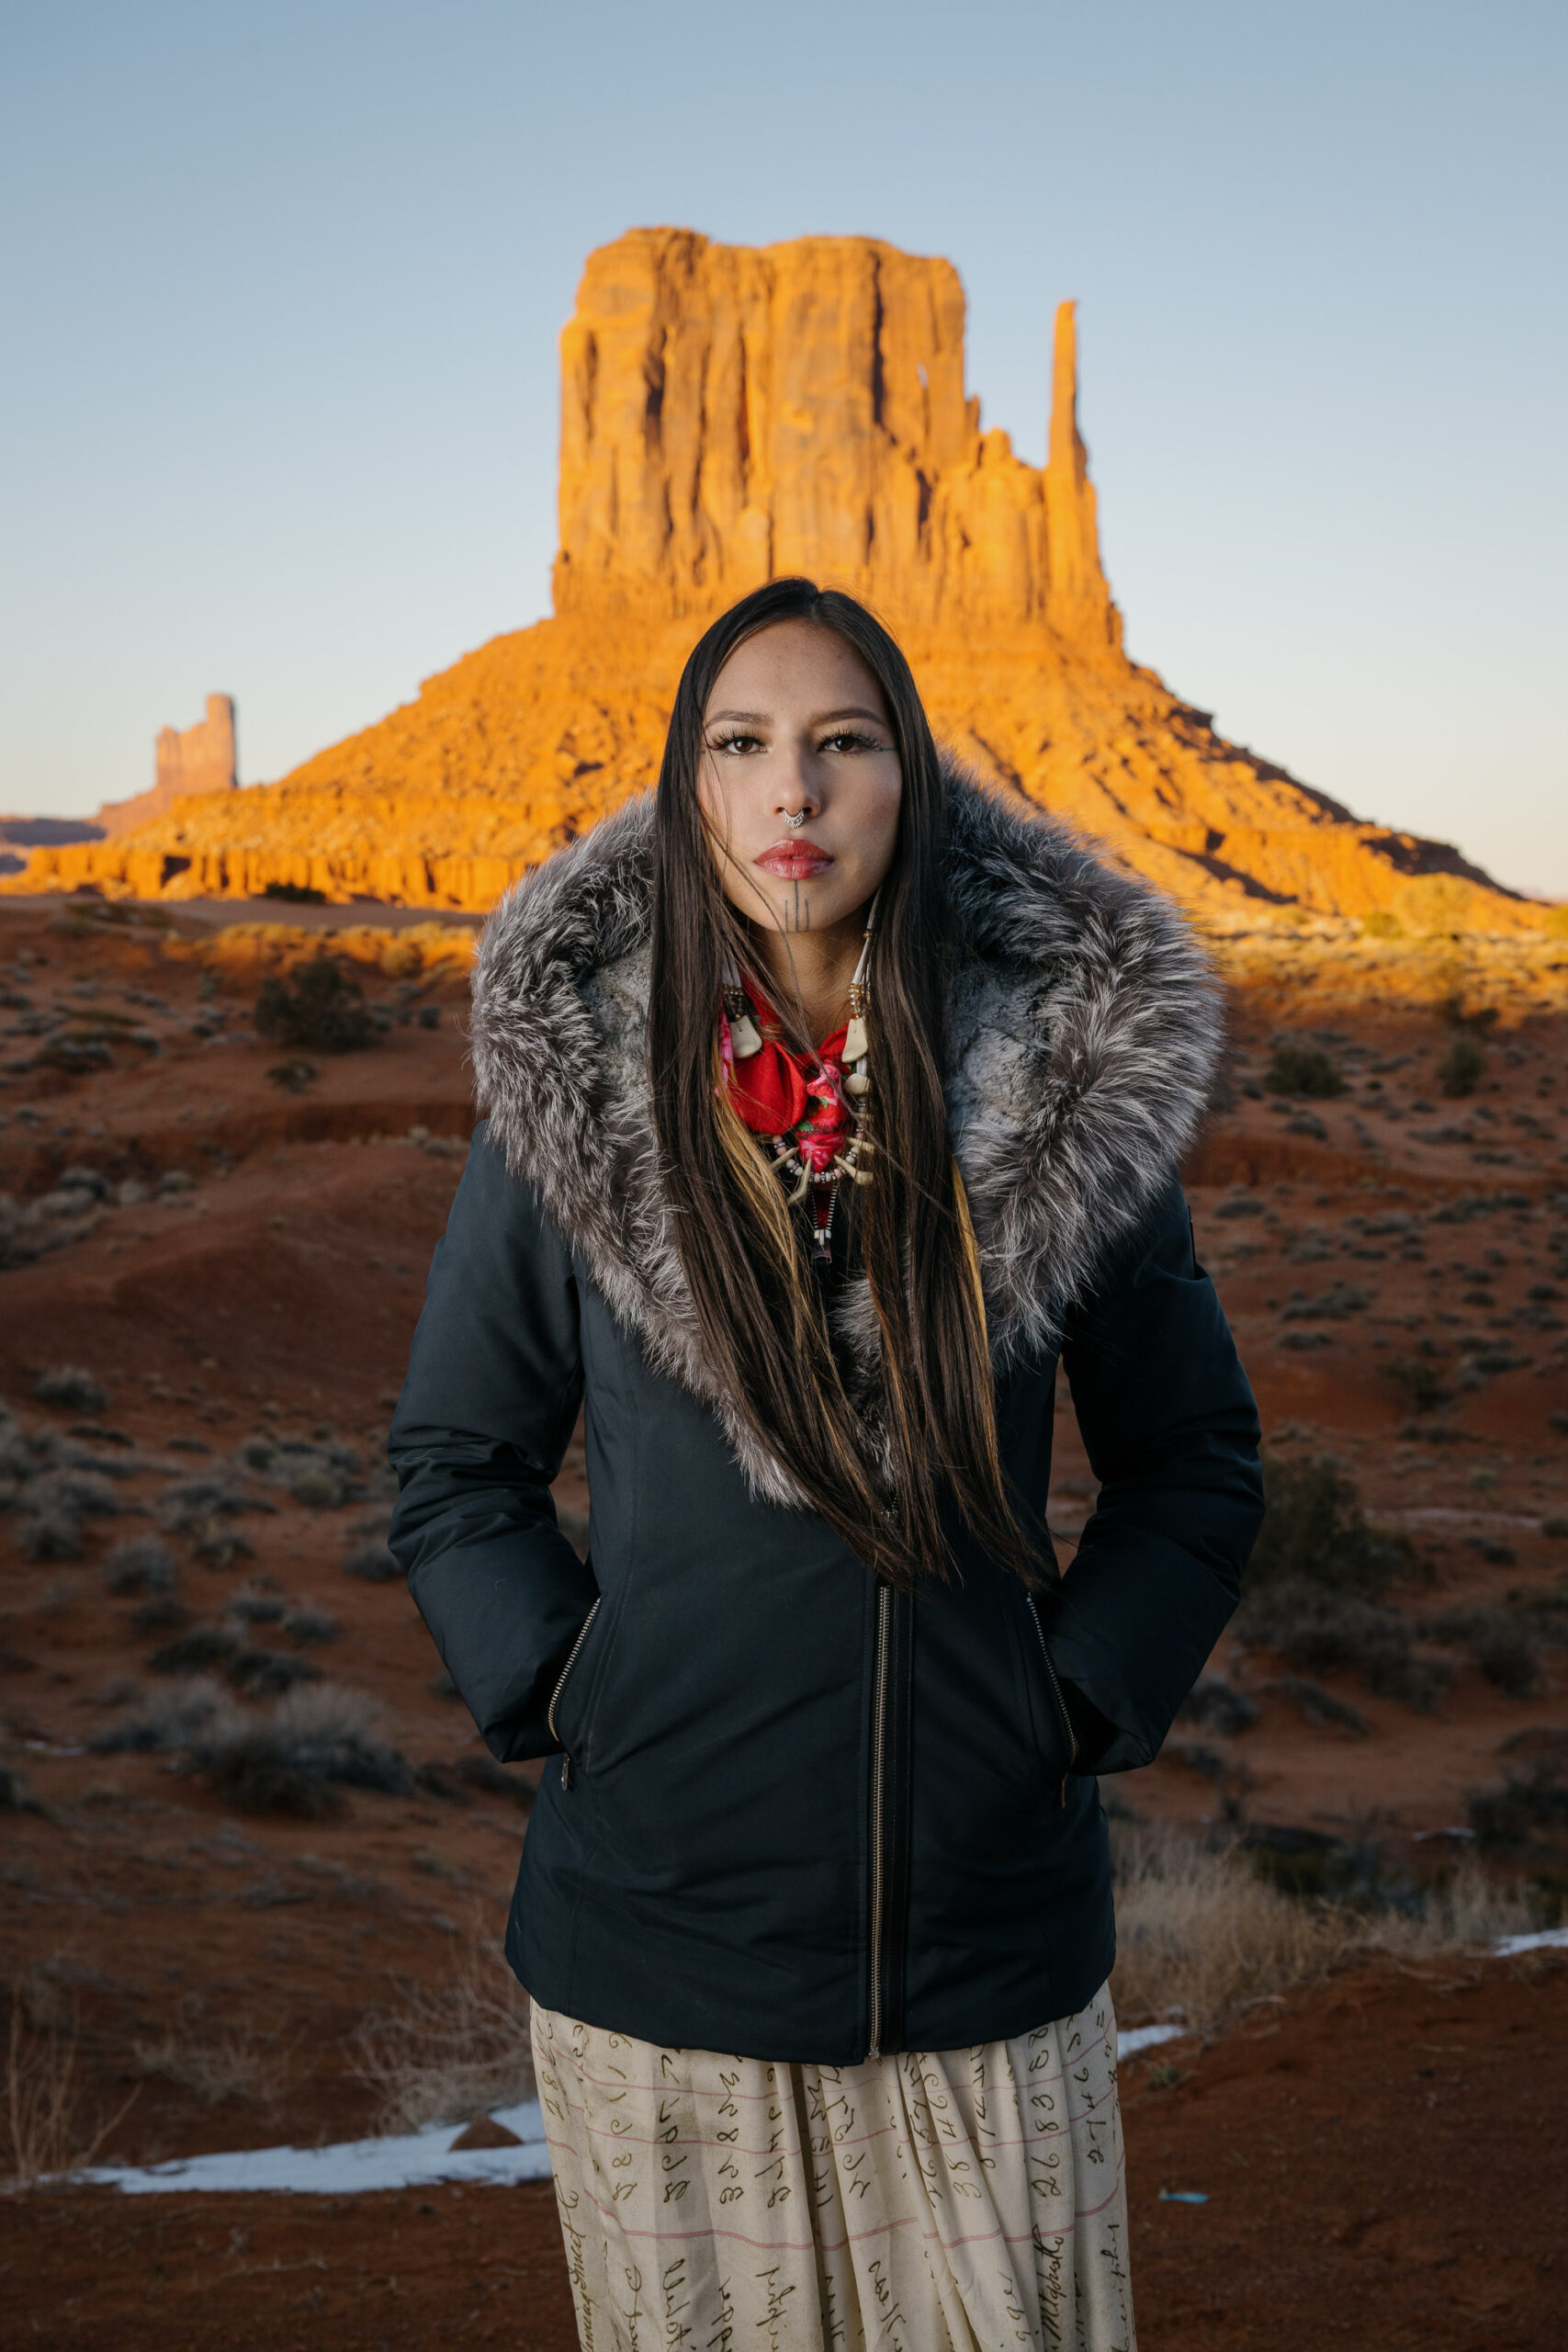 Portrait of Quannah Rose Chasinghorse-Potts, in front of sacred Indigenous land near her childhood home on the Navajo Nation. The landform is known as West Mitten, in Monument Valley, Utah. Set aside in 1958, it is a Navajo Nation tribal park, considered sacred by Diné and managed by the nation. Self-management of lands sacred to Indigenous peoples is one major aspect of the Native American landback movement.